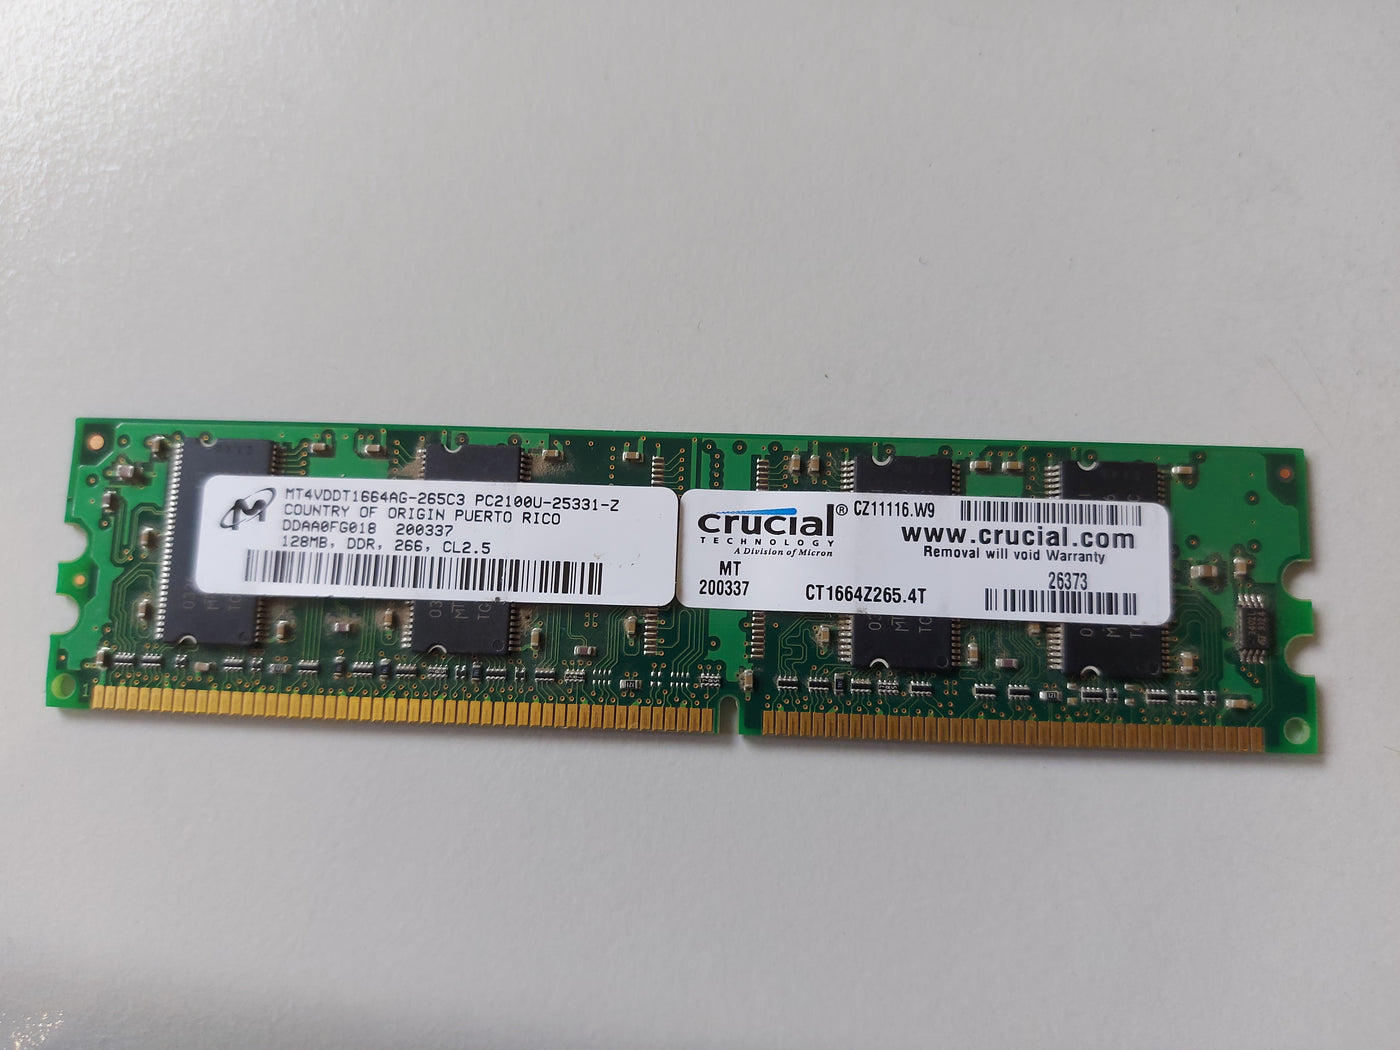 Micron Crucial 128MB PC2100 DDR-266MHz non-ECC Unbuffered CL2.5 184-Pin DIMM Single Rank Memory Module ( MT4VDDT1664AG-265C3 CT1664Z265.4T ) REF